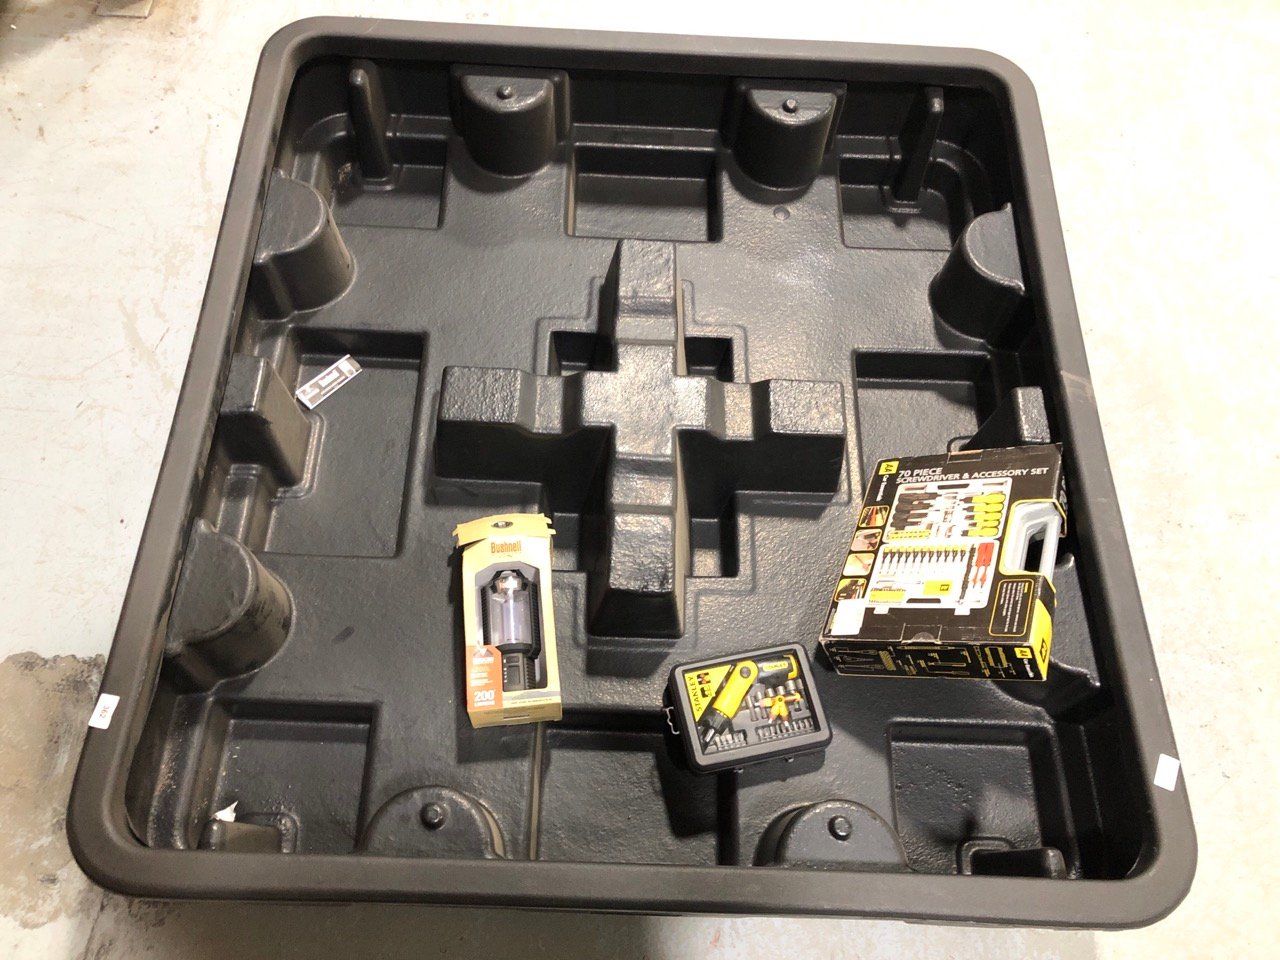 EXTRA LARGE VEHICLE DIP TRAY, 1X AA 70 PIECE SCREWDRIVER AND ACCESSORY SET,STANLEY 25 PIECE SOCKET SET,OUTDOOR COMPACT LANTERN RRP Ã‚Â£390